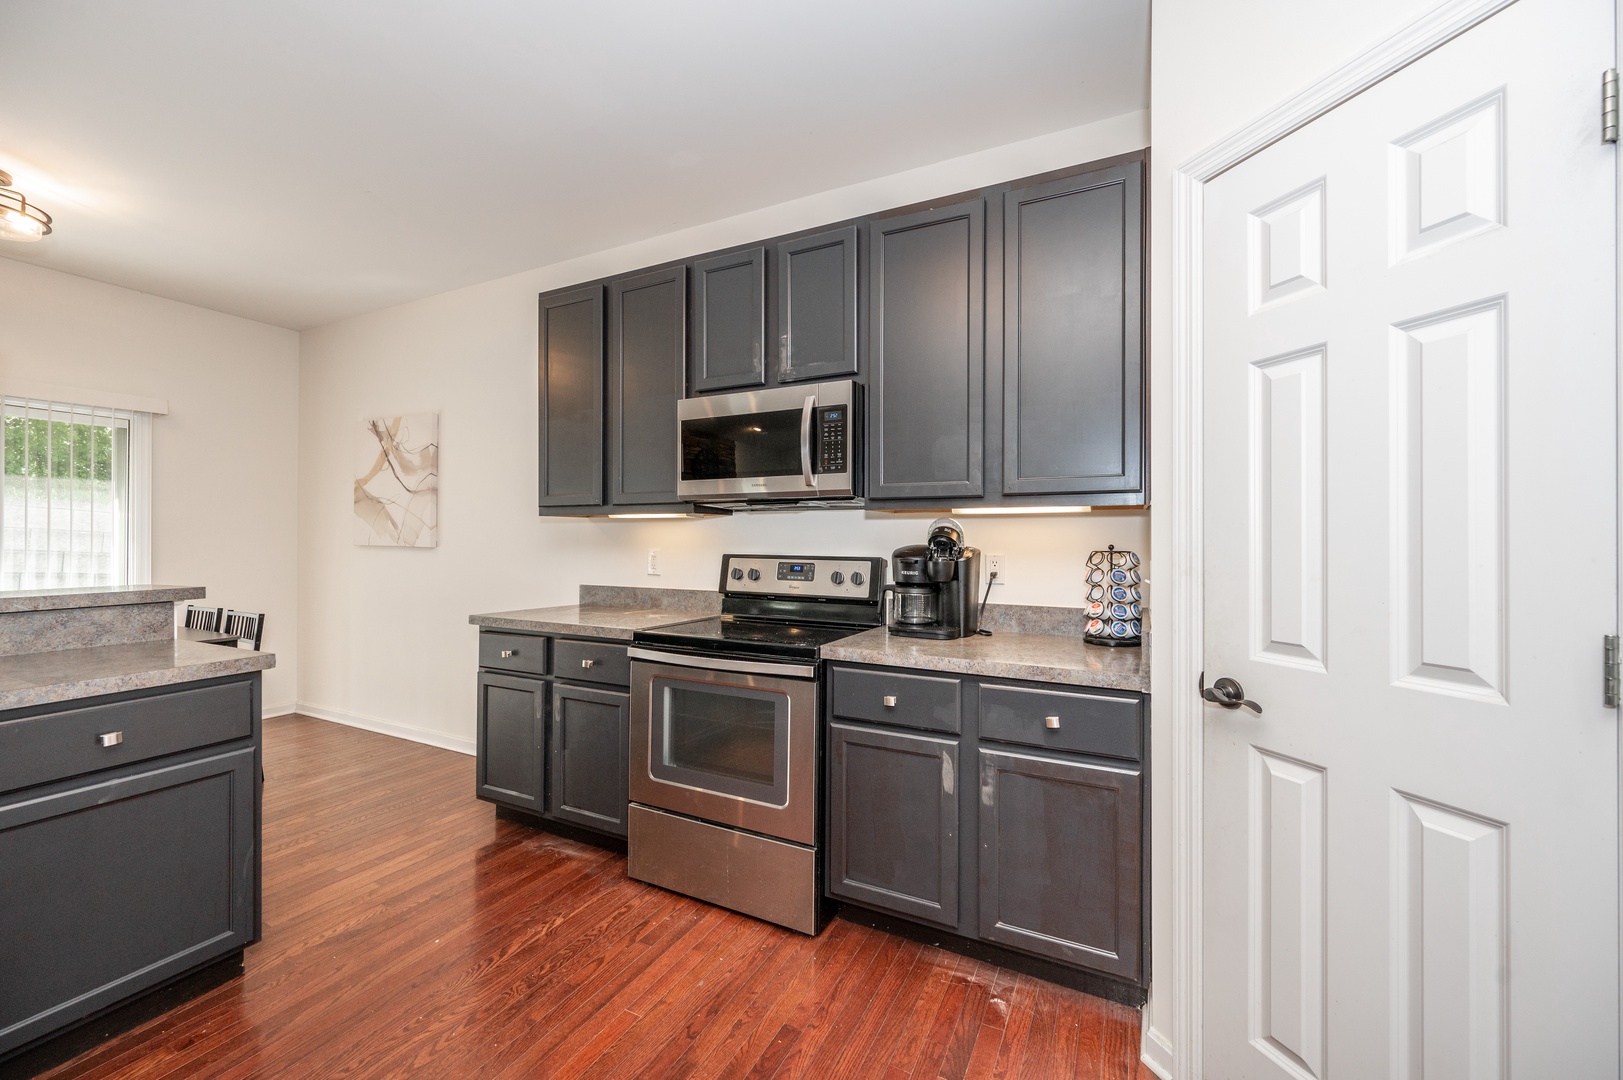 The open kitchen is spacious & fully-equipped with great amenities